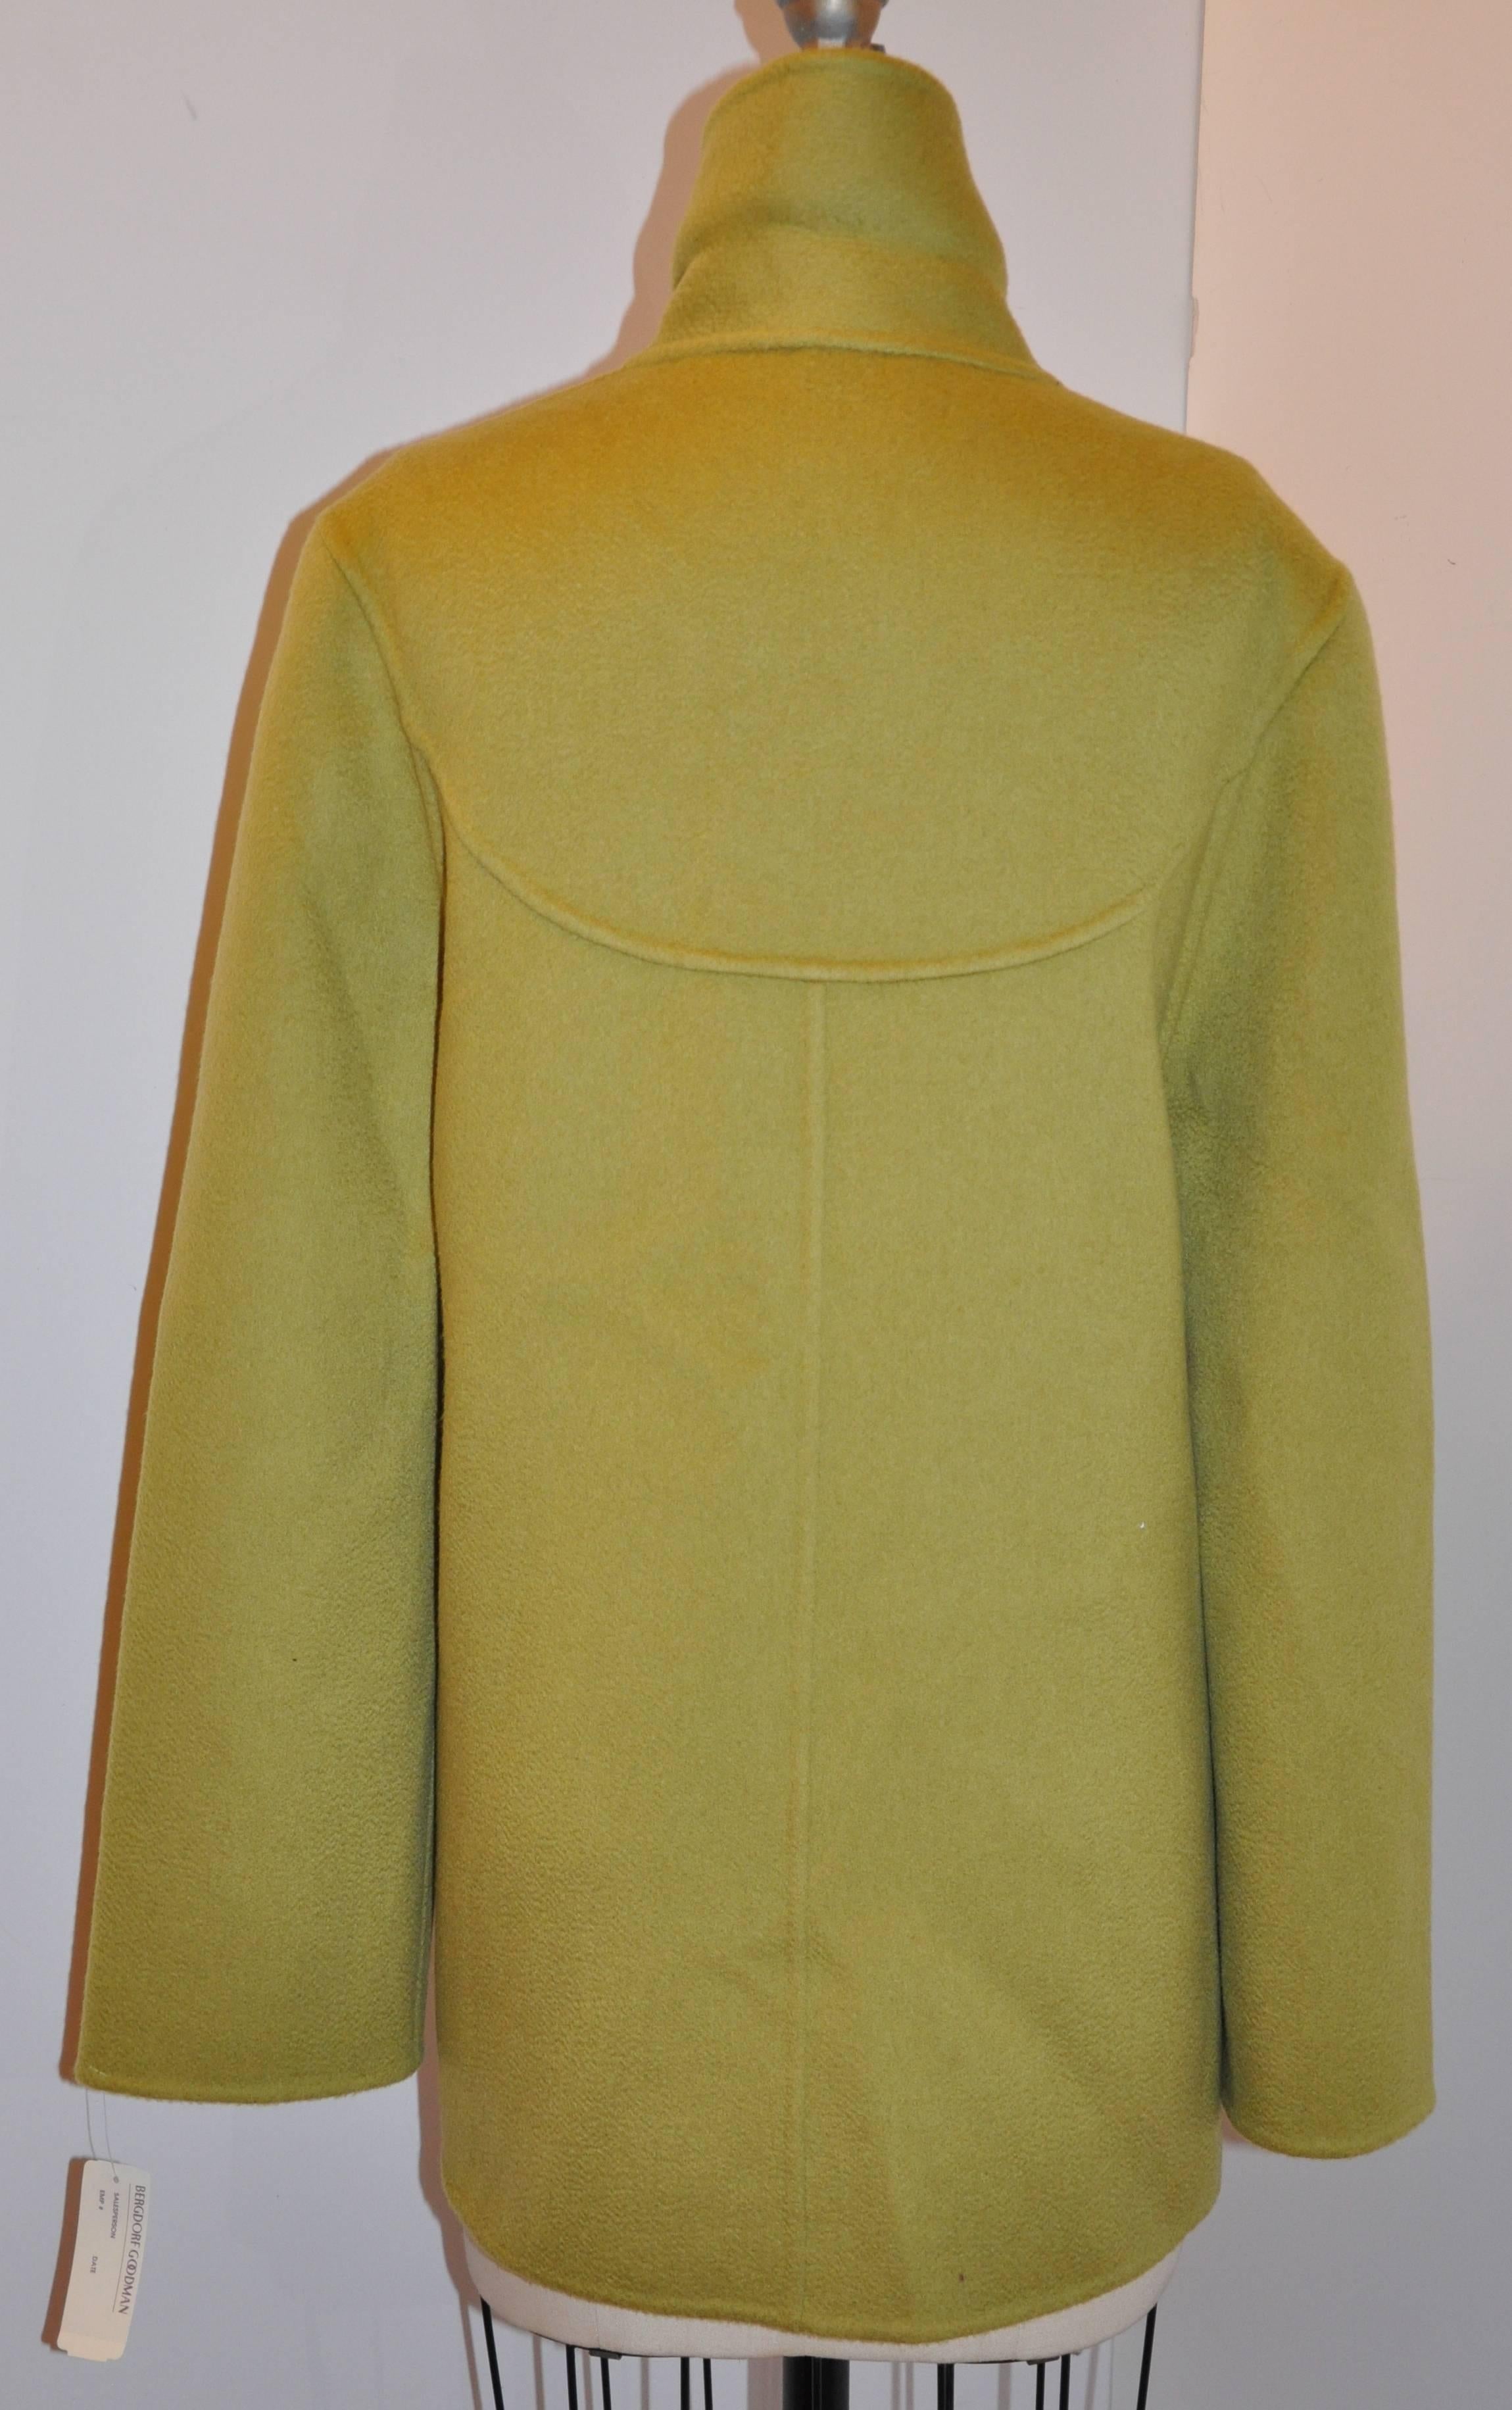        Bill Blass/Bergdorf Goodman warm olive green double-faced 2-ply cashmere open car coat features two set-in pockets in front. The interior of the two front pockets are finished with hand-stitched silk cord edges to keep the pockets flat in the